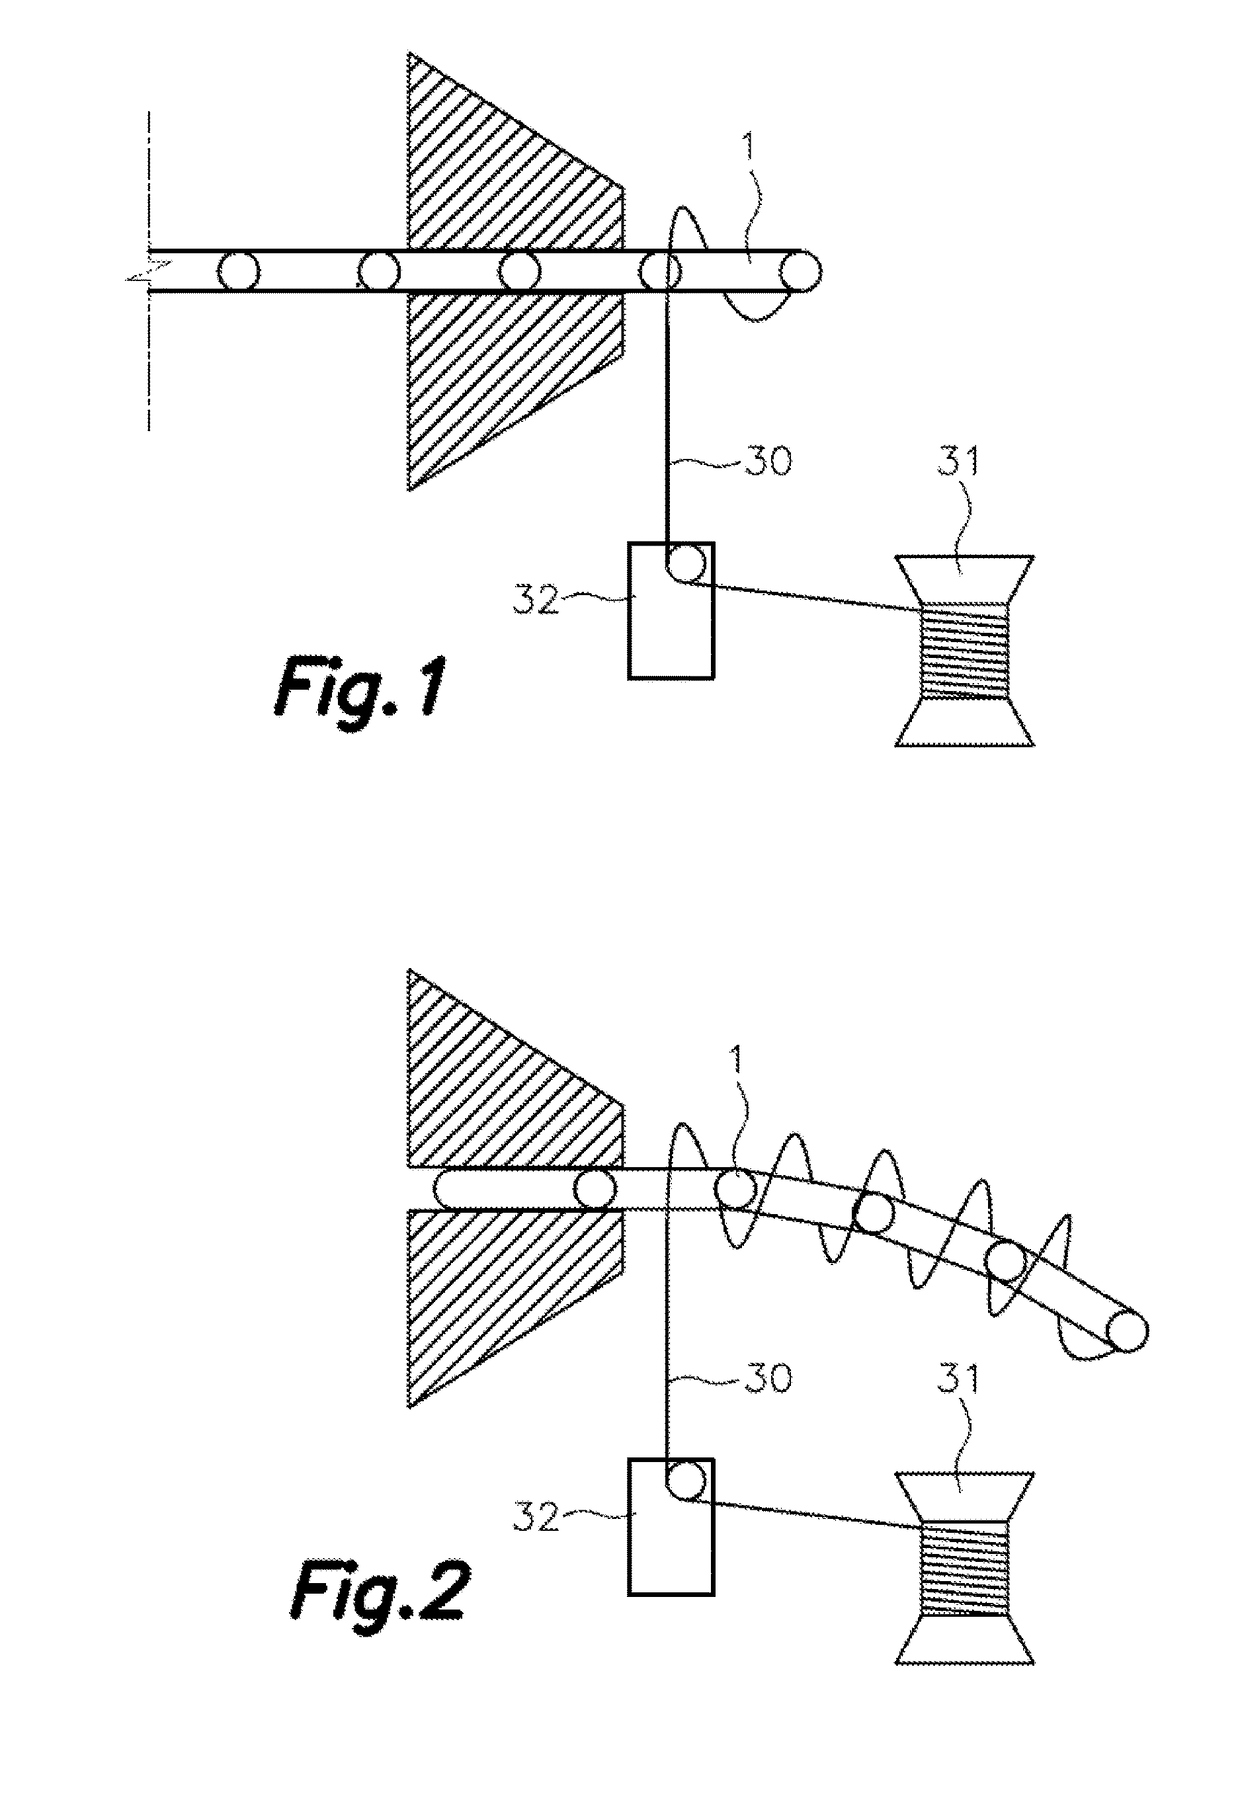 Installation and method for winding an elongated flexible inductor